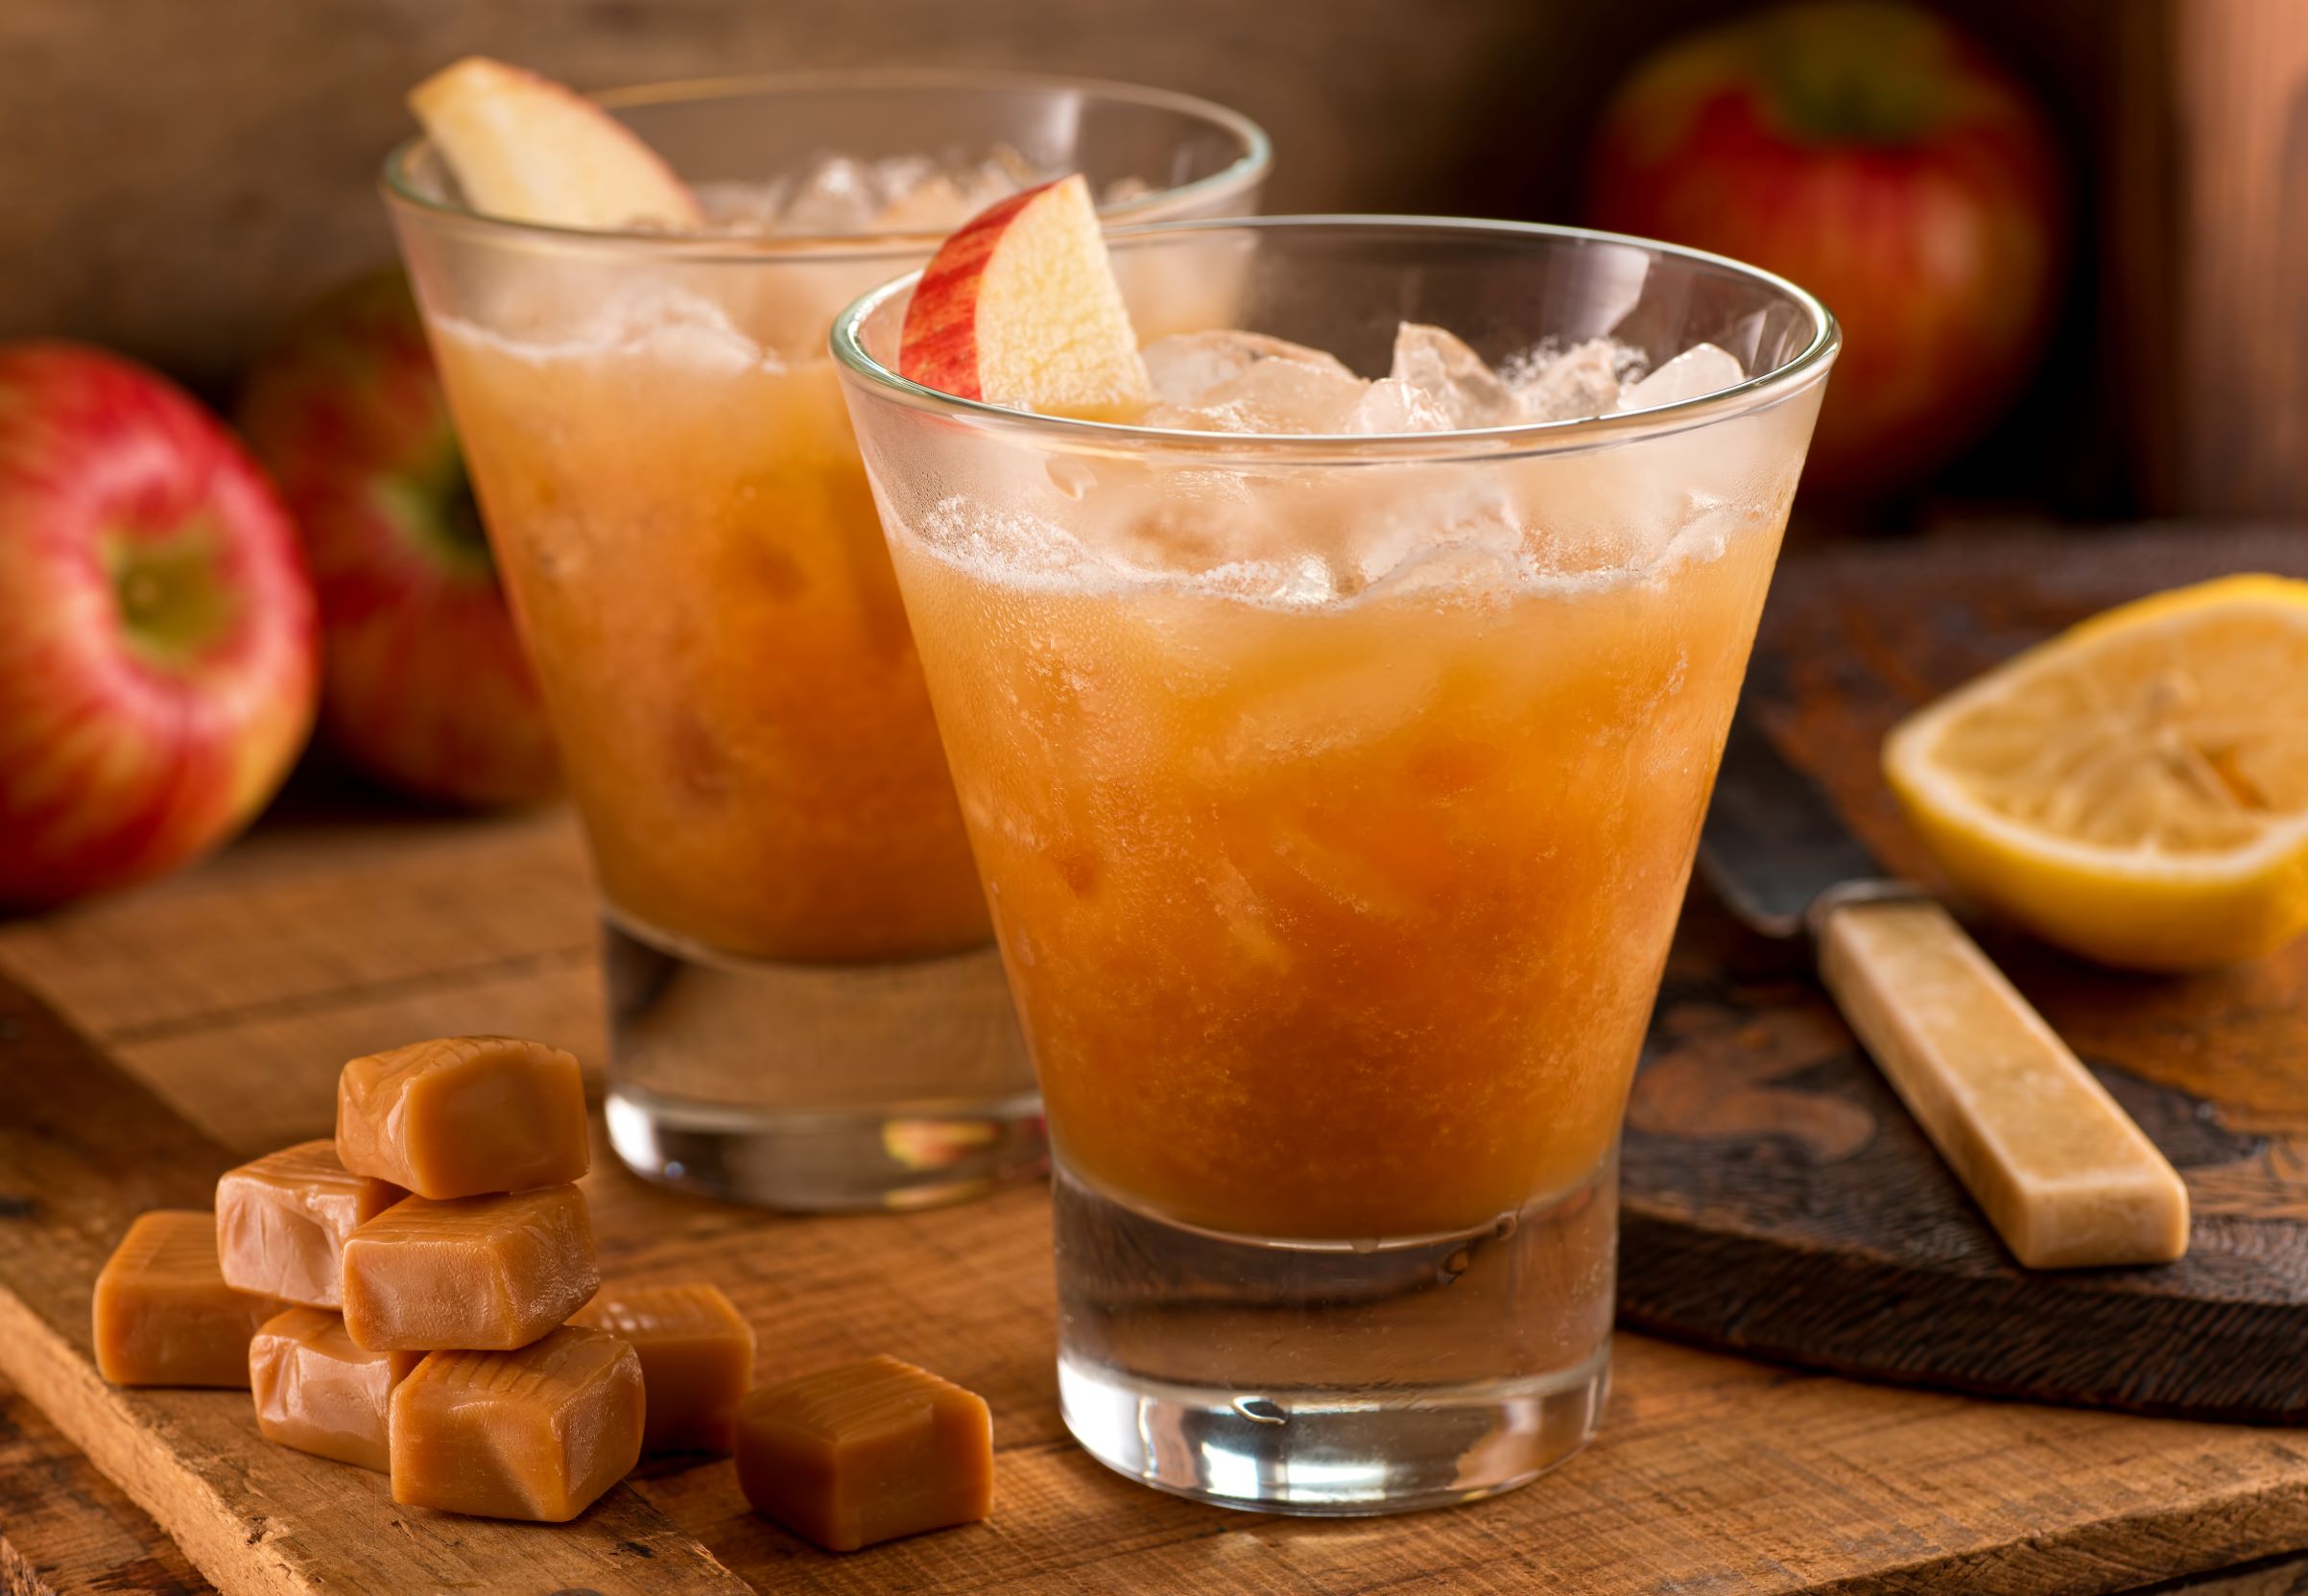 two glasses of fall caramel apple cocktails with apple slice garnishes on a wood table with caramel candies and apples.